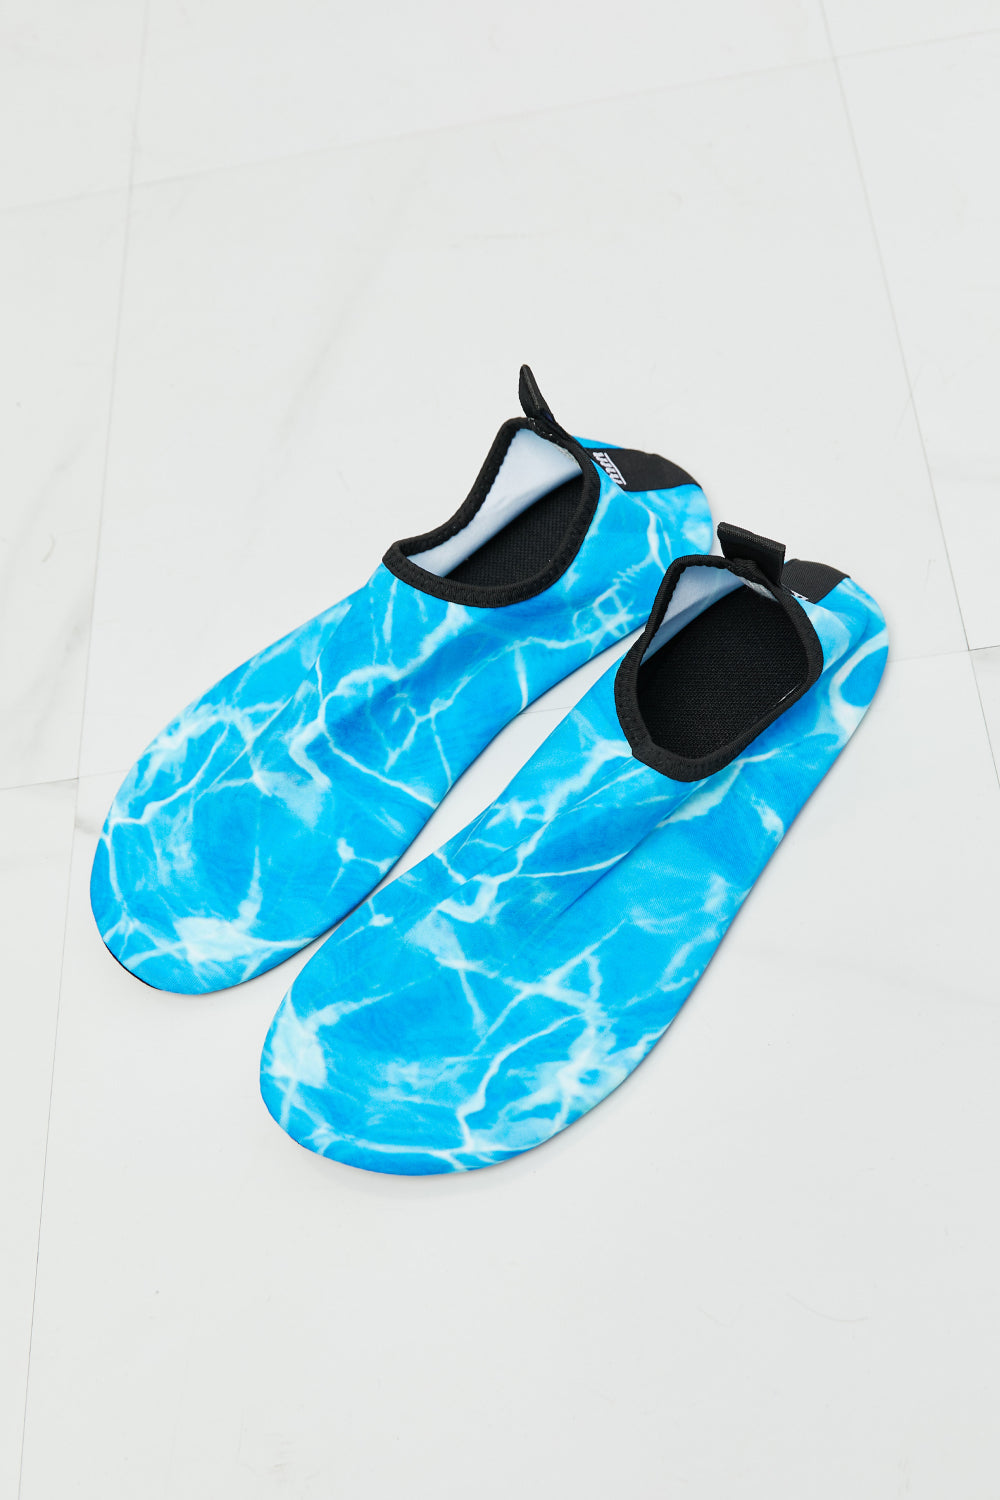 MMshoes On The Shore Water Shoes in Sky Blue